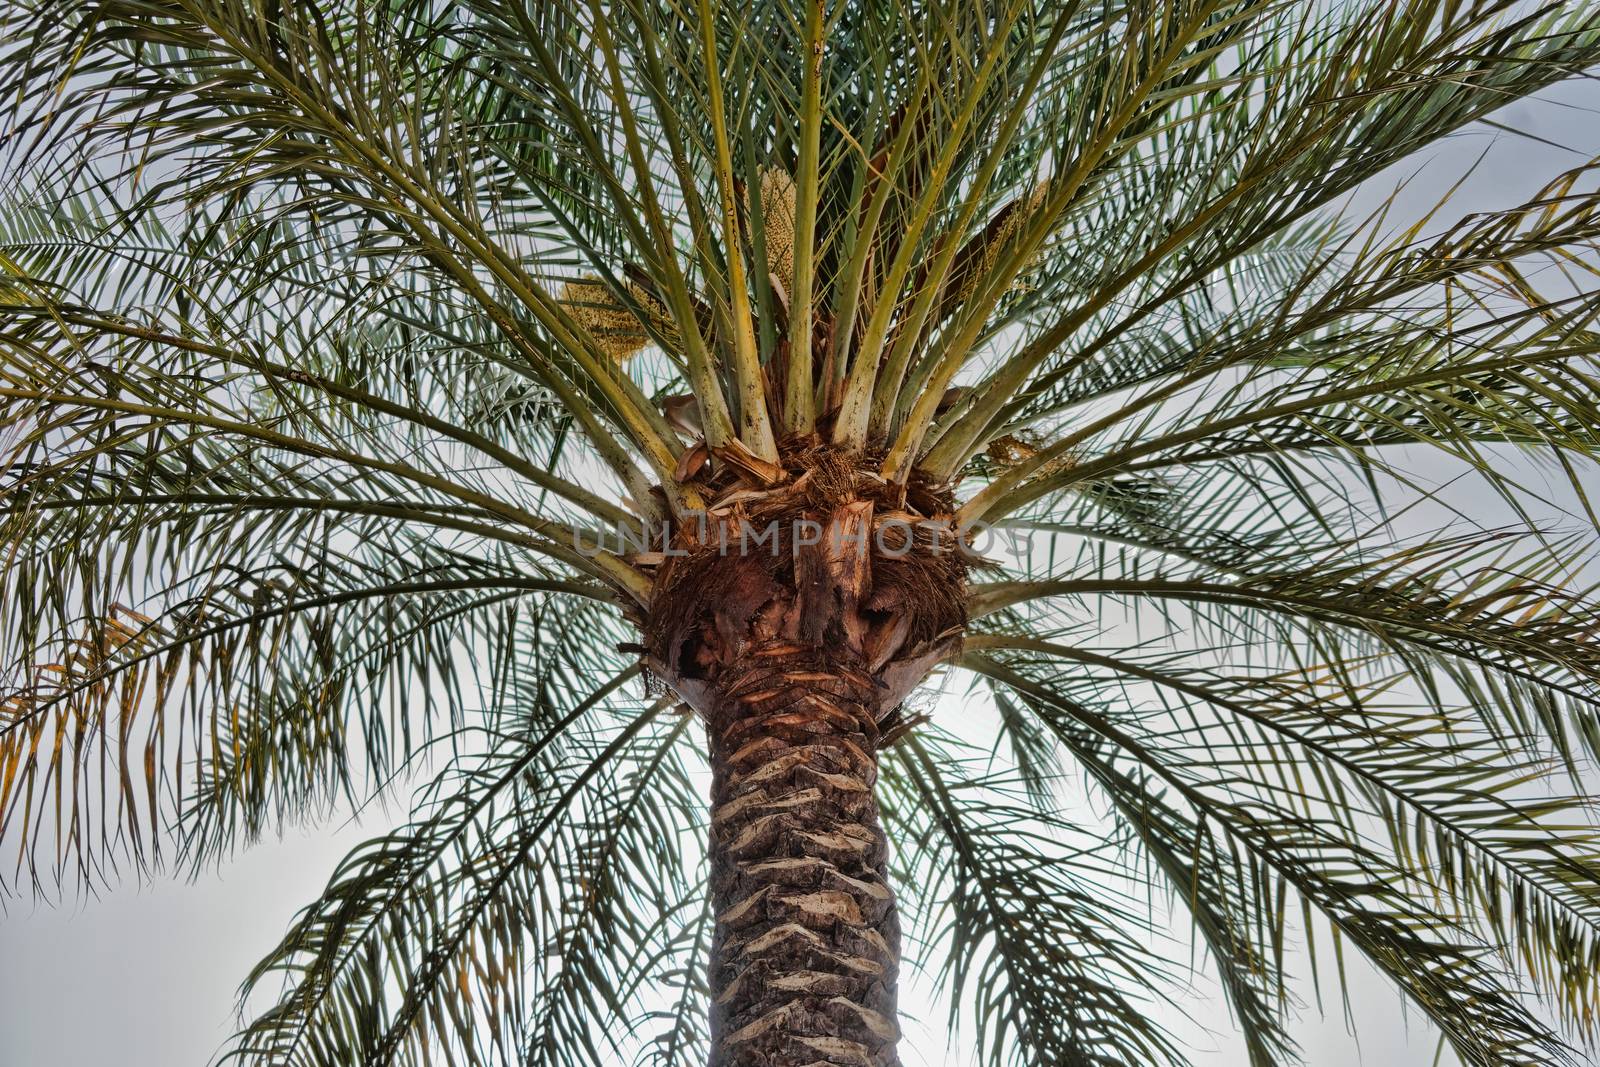 Large palm tree in the back light, photographed on the beach of Aqaba, Jordan by geogif